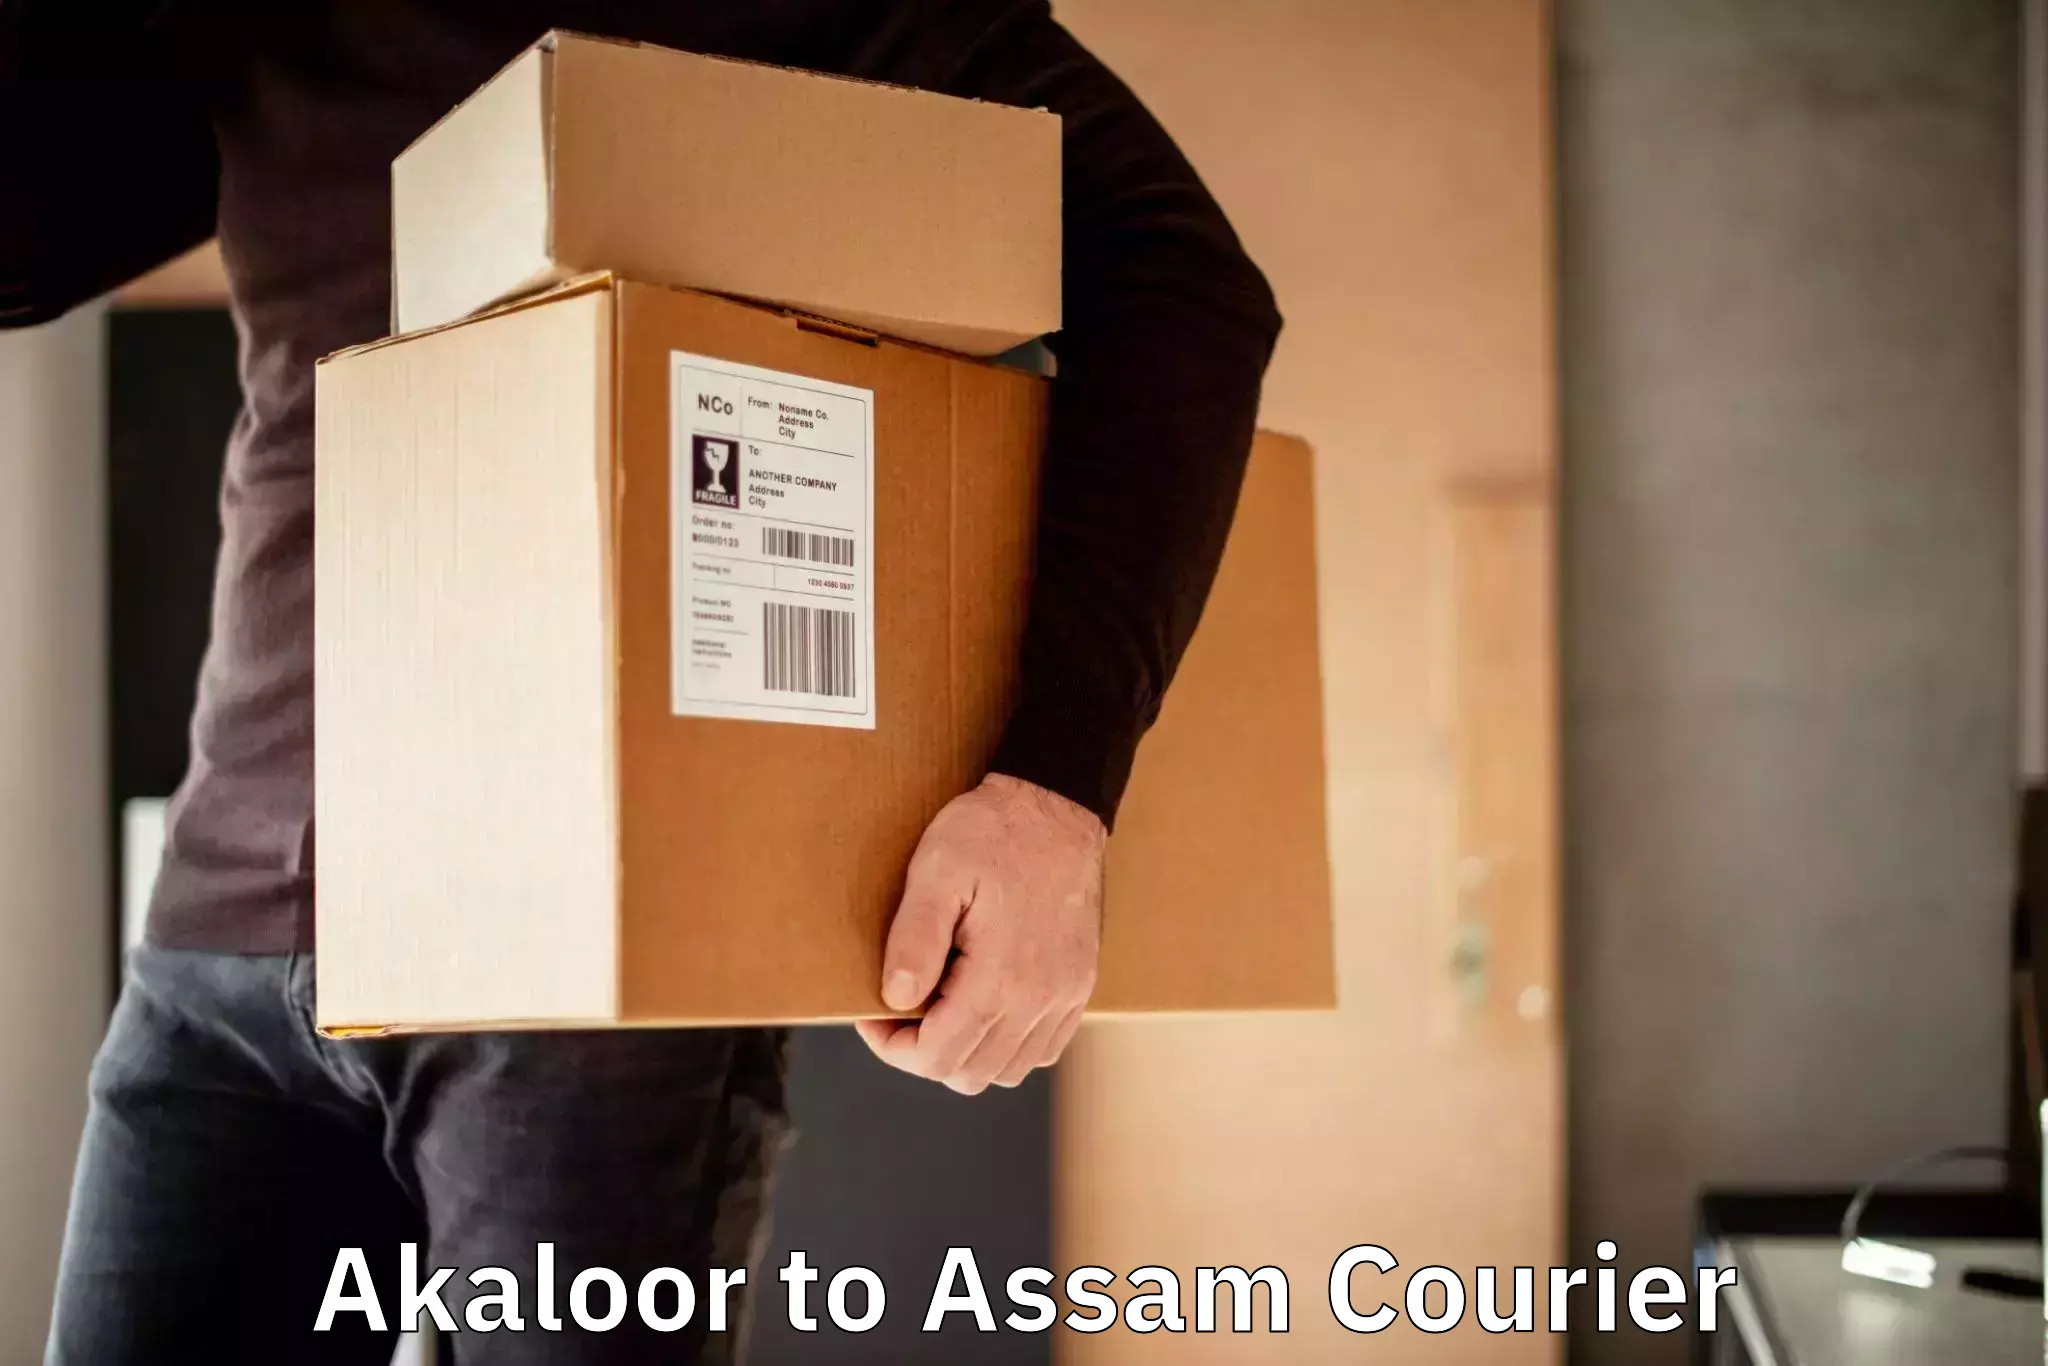 24-hour courier service Akaloor to Lala Assam